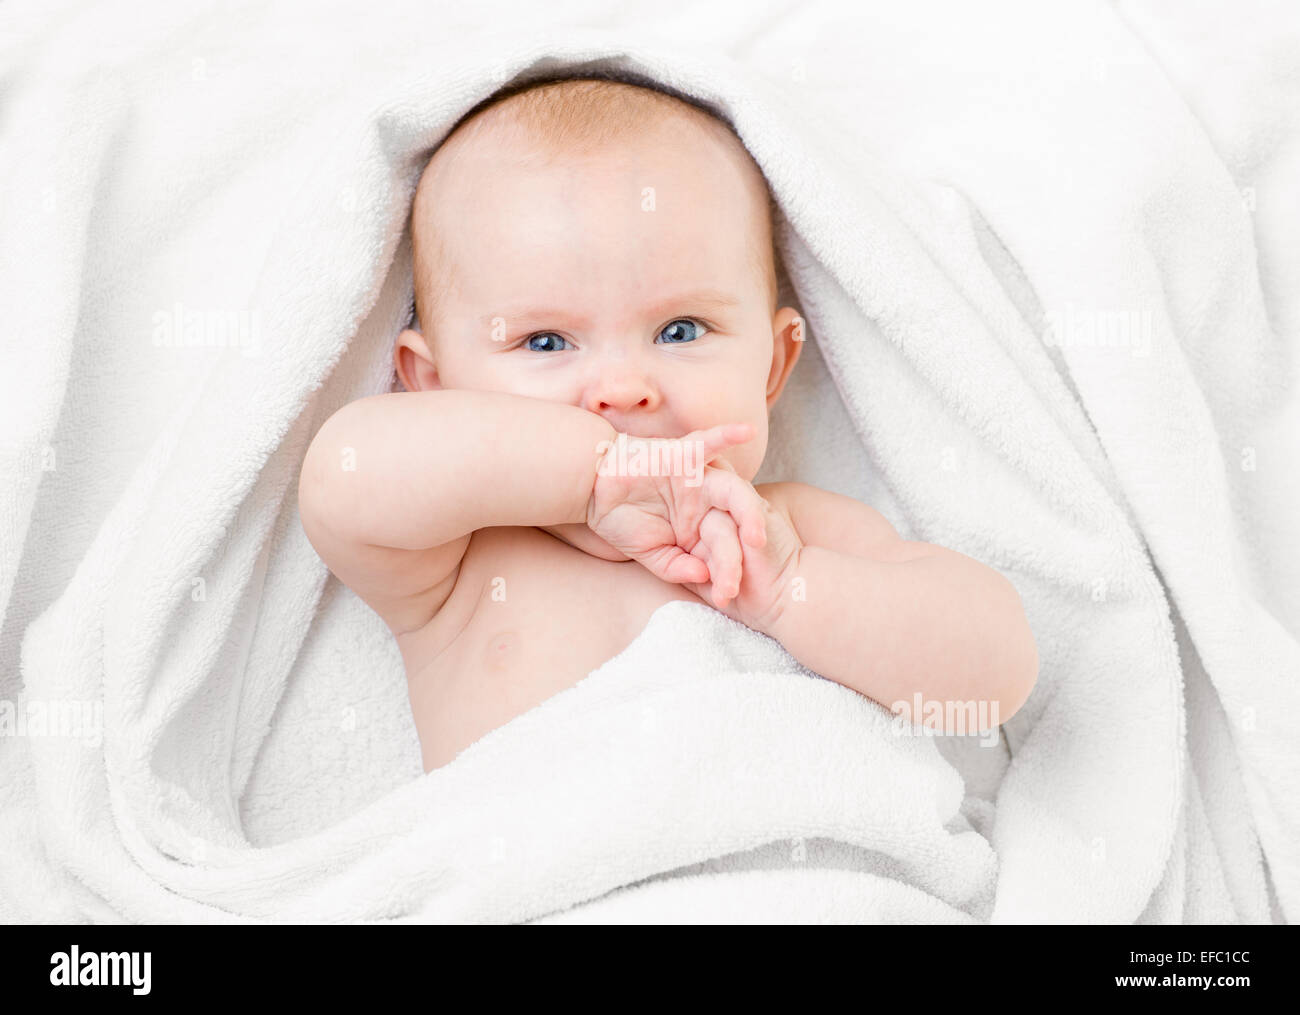 Cute baby lying on white towel and sucking own hand Stock Photo